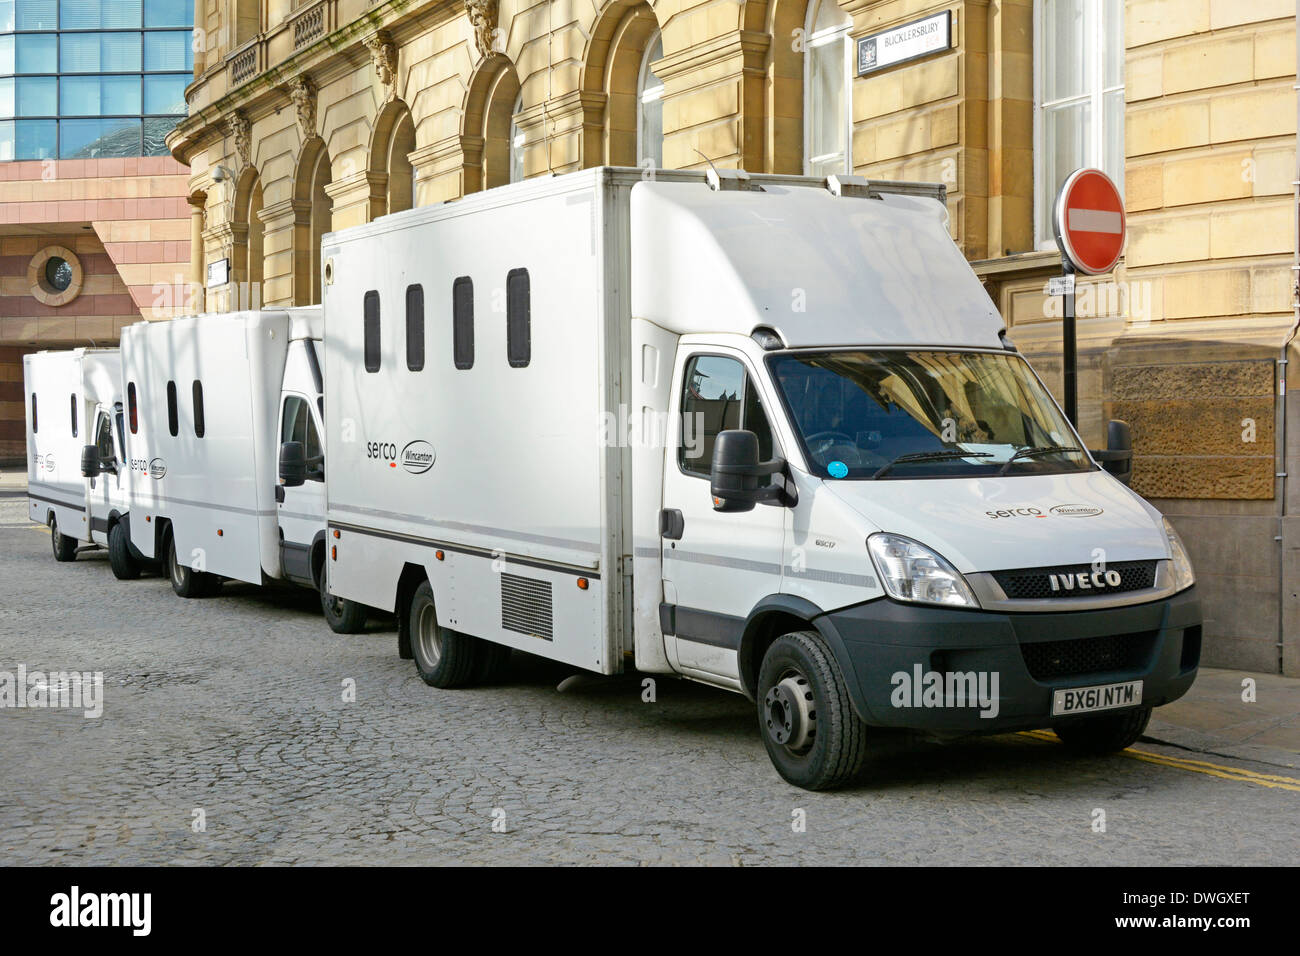 Three joint venture Serco Wincanton prisoner transport vans parked outside rear courthouse entrance to City of London Magistrates Court Stock Photo